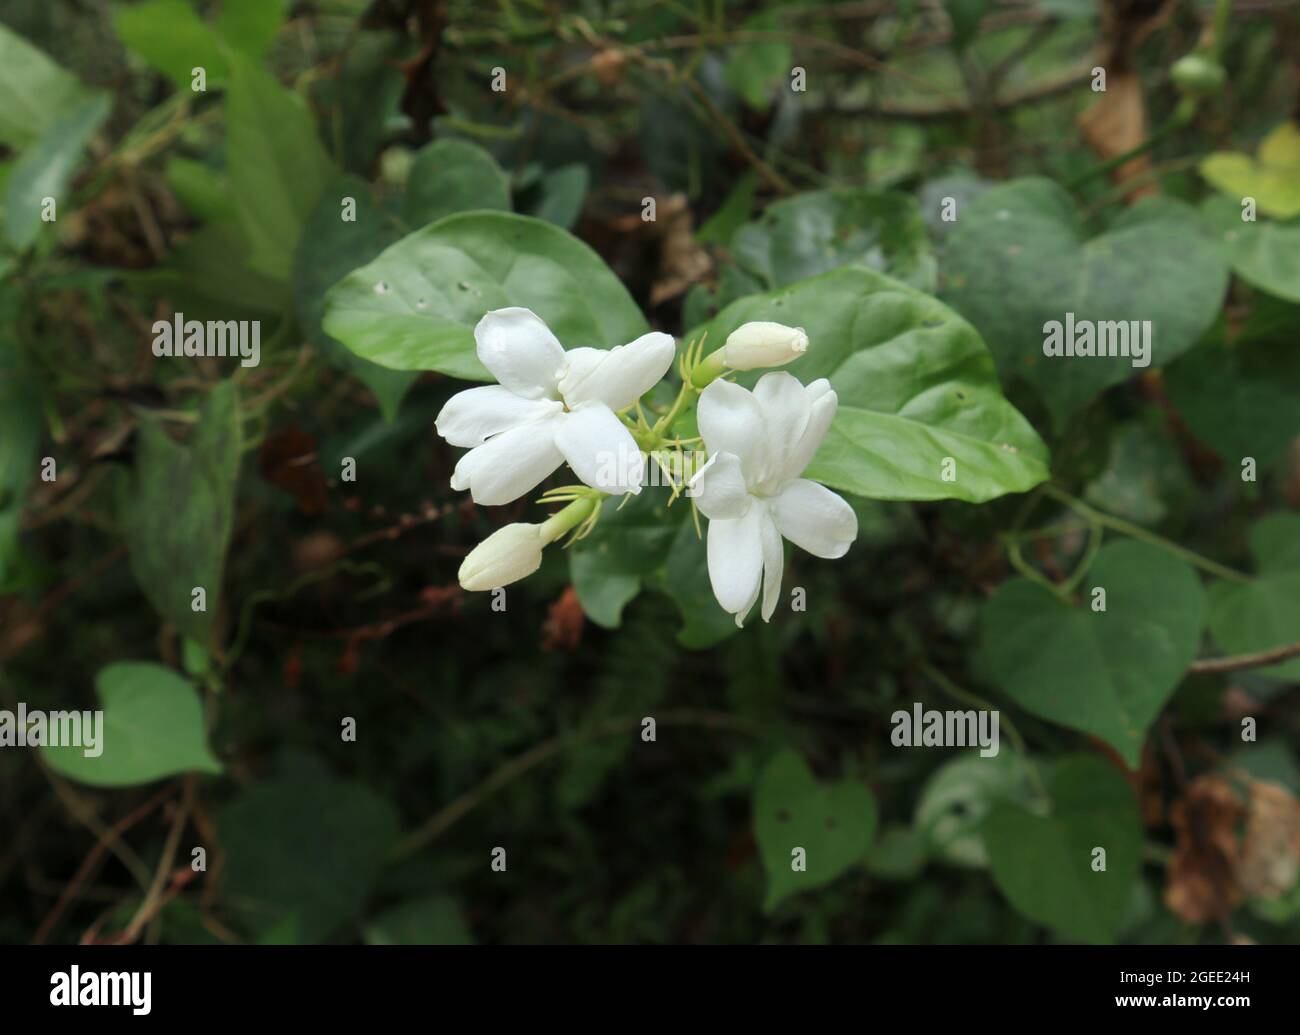 Close up of a Jasminum flowers bunch, including two flowers and two young flowers, this plant is called as Gata pichcha in Sri Lanka Stock Photo